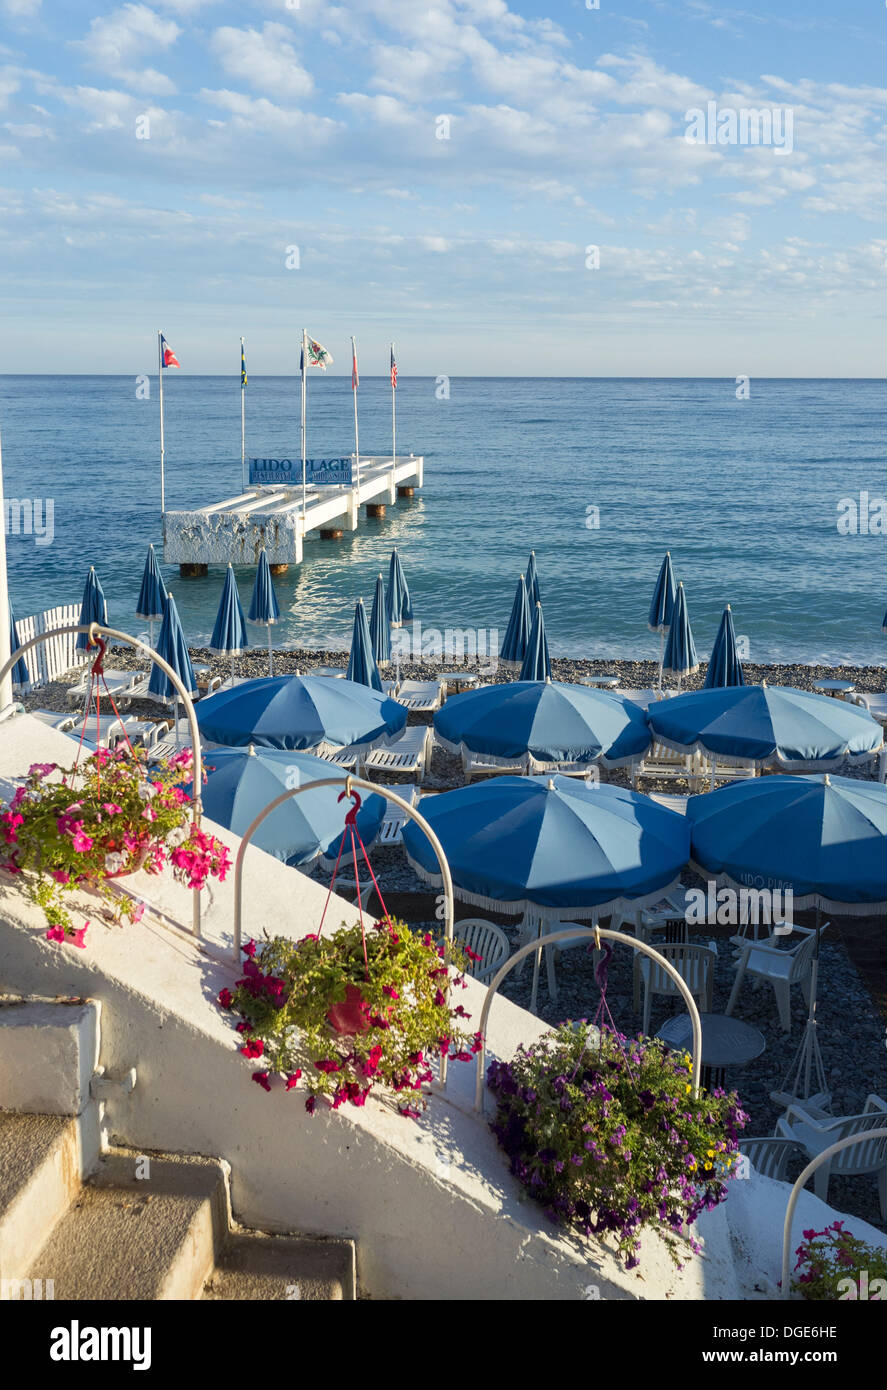 Sunbeds at Lido Plage on the main beach at Nice. Stock Photo